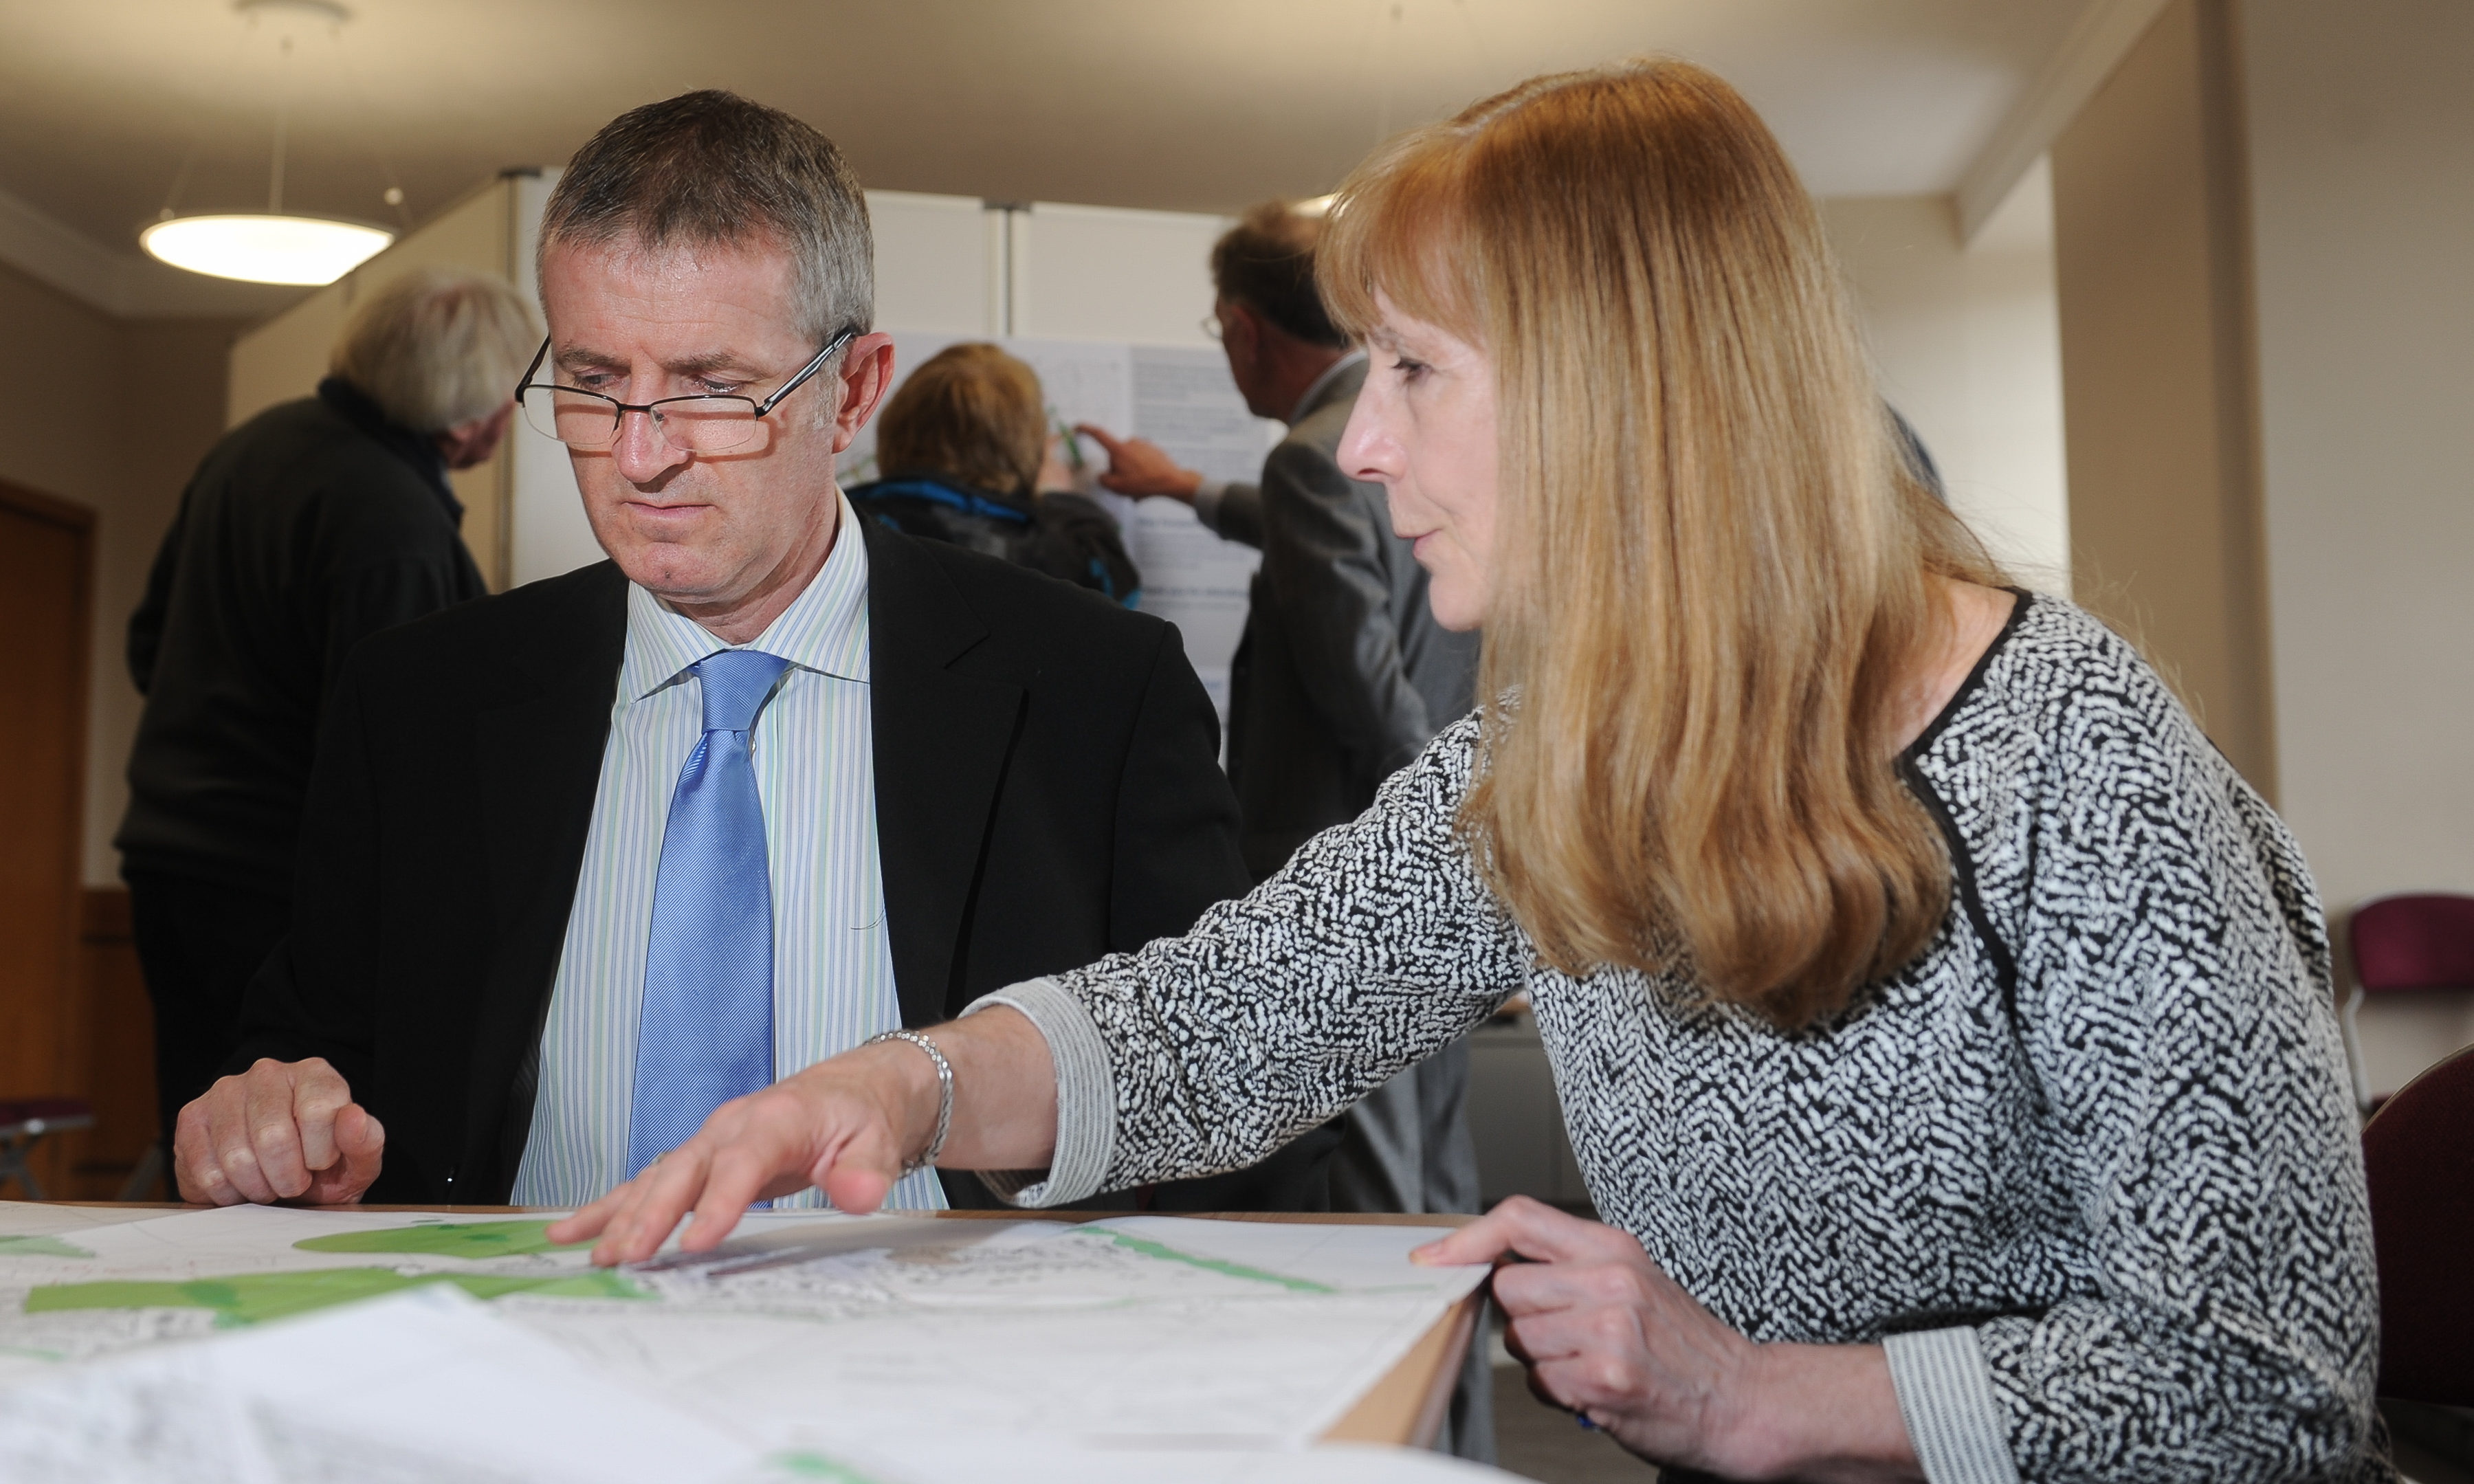 Public presentation on Planning Application Notice for major housing development at Westfield Loan, Forfar. Picture shows; l to r - member of the public, Euan Cameron discusses the plans with Jacquie Forbes (Consulting Architect for the project), Lesser Reid Hall, Forfar, Wednesday 02nd May 2018